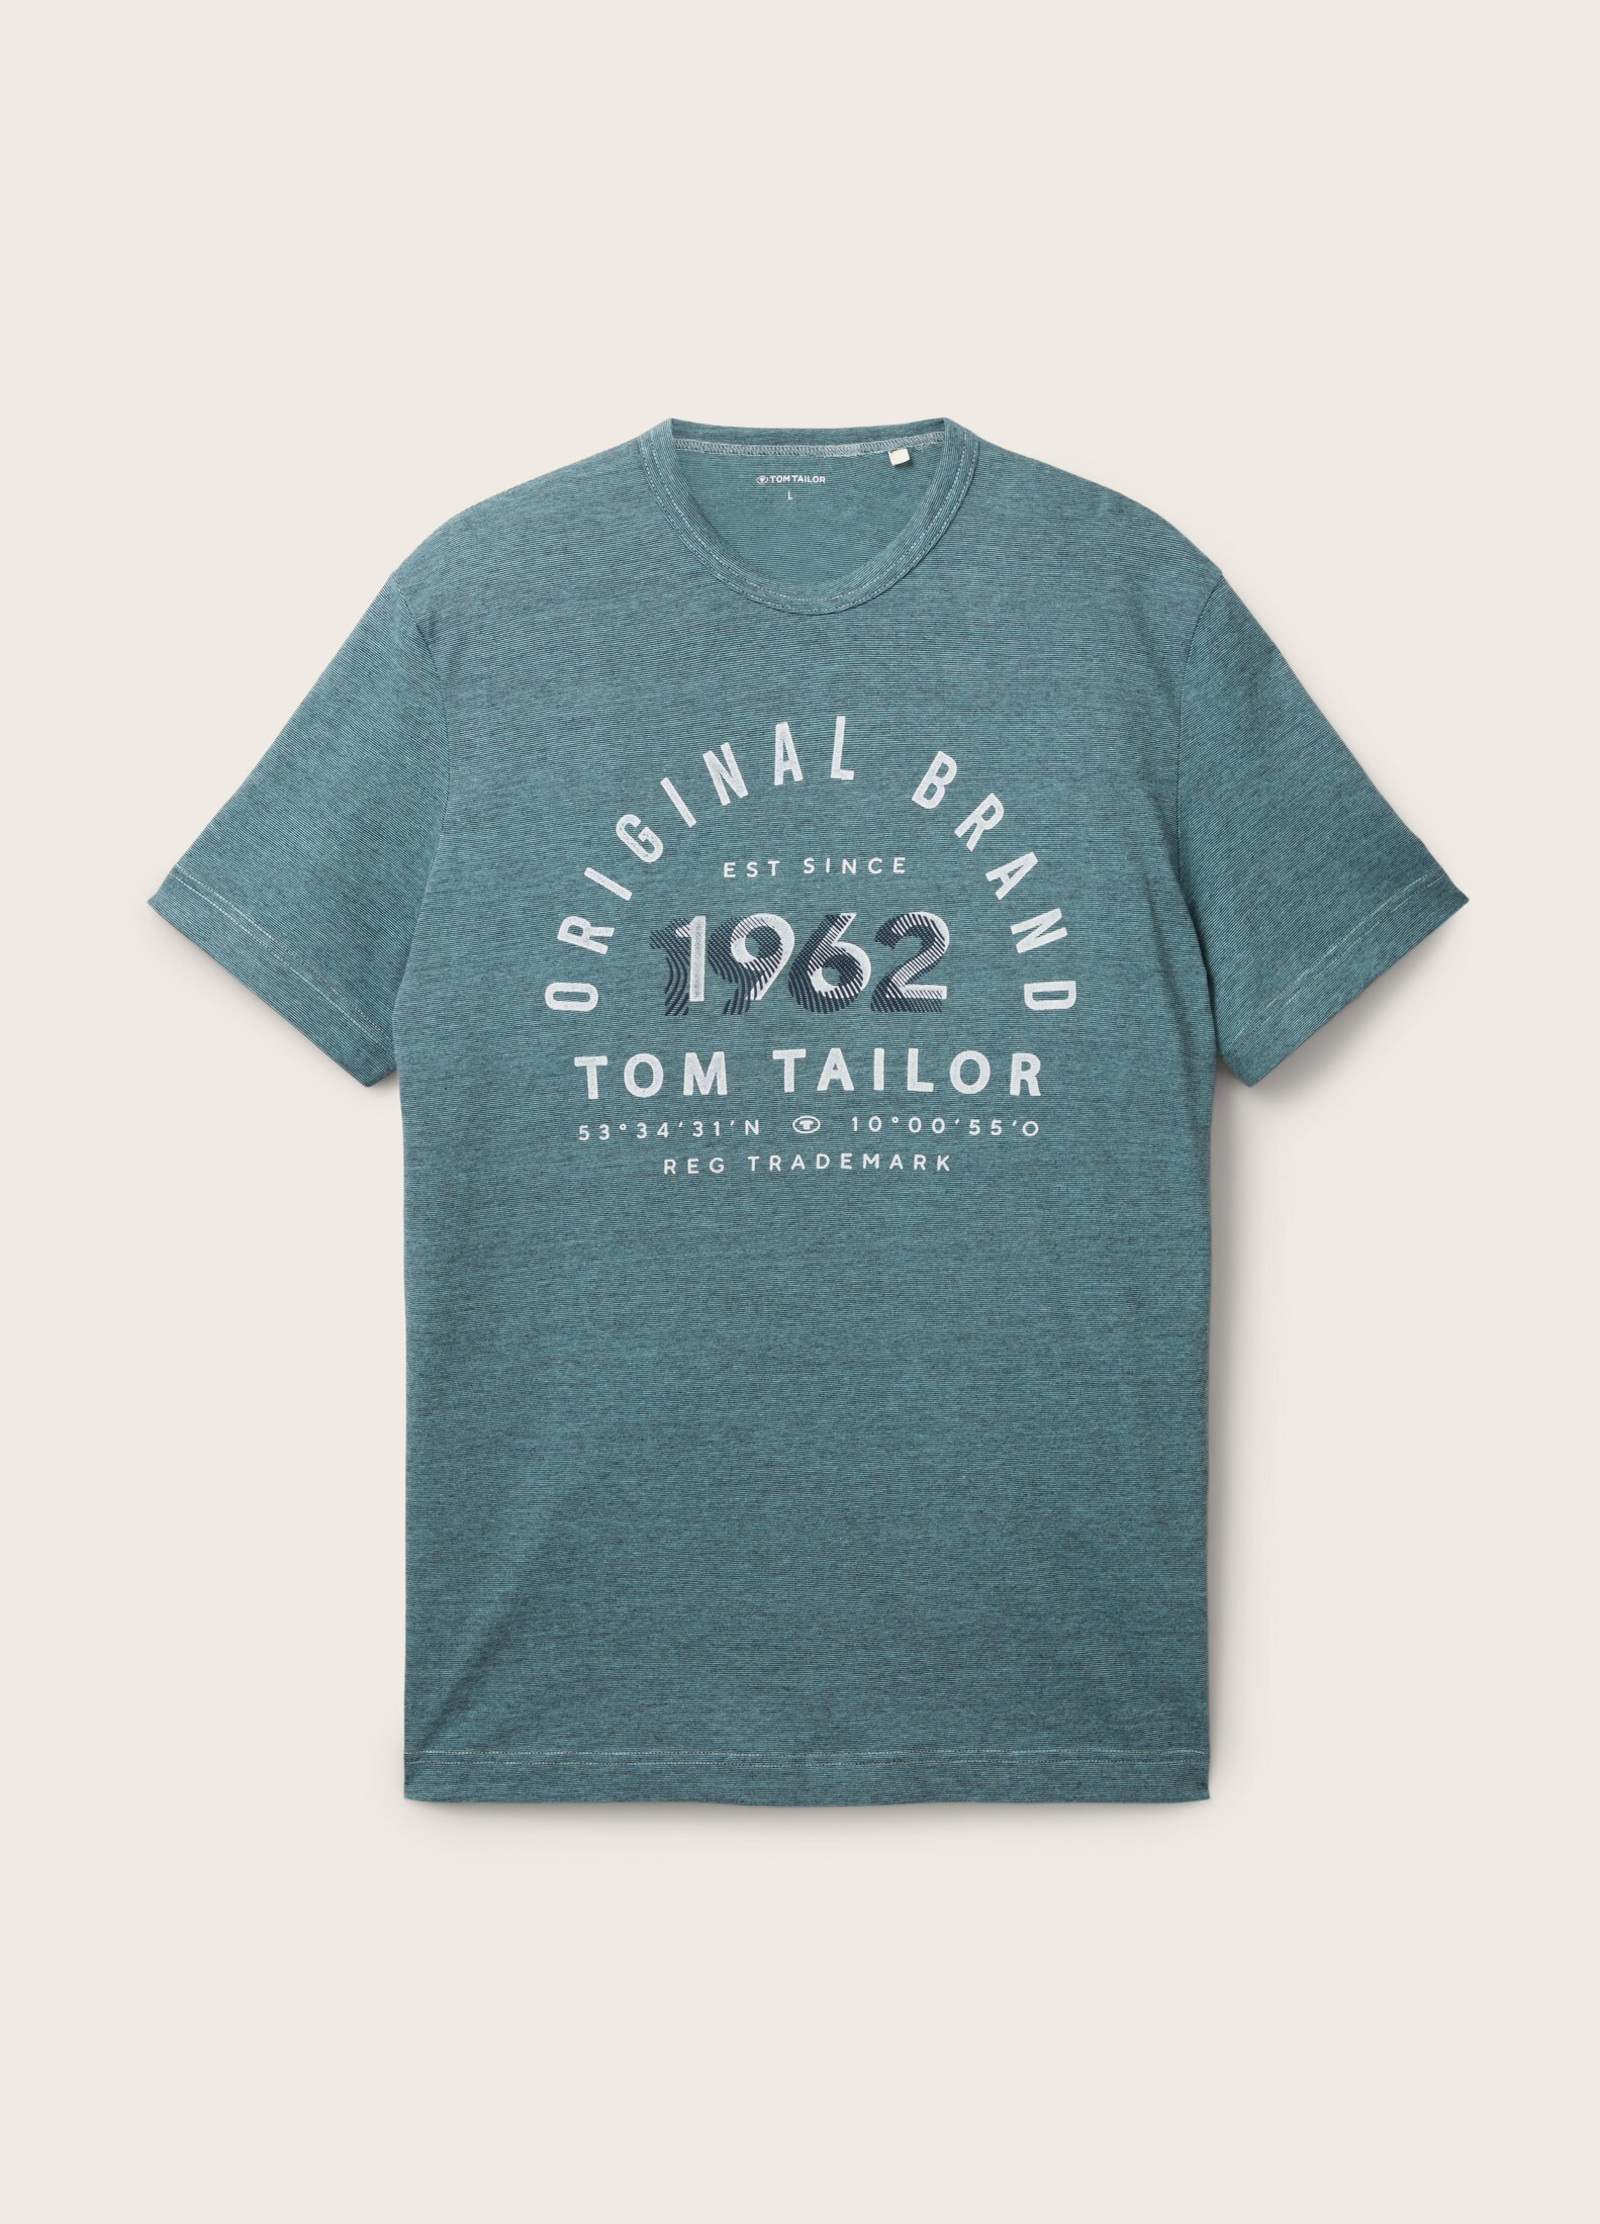 Tom Tailor® With Fine - Stone L T-shirt Size Print Navy Stripe A Blue